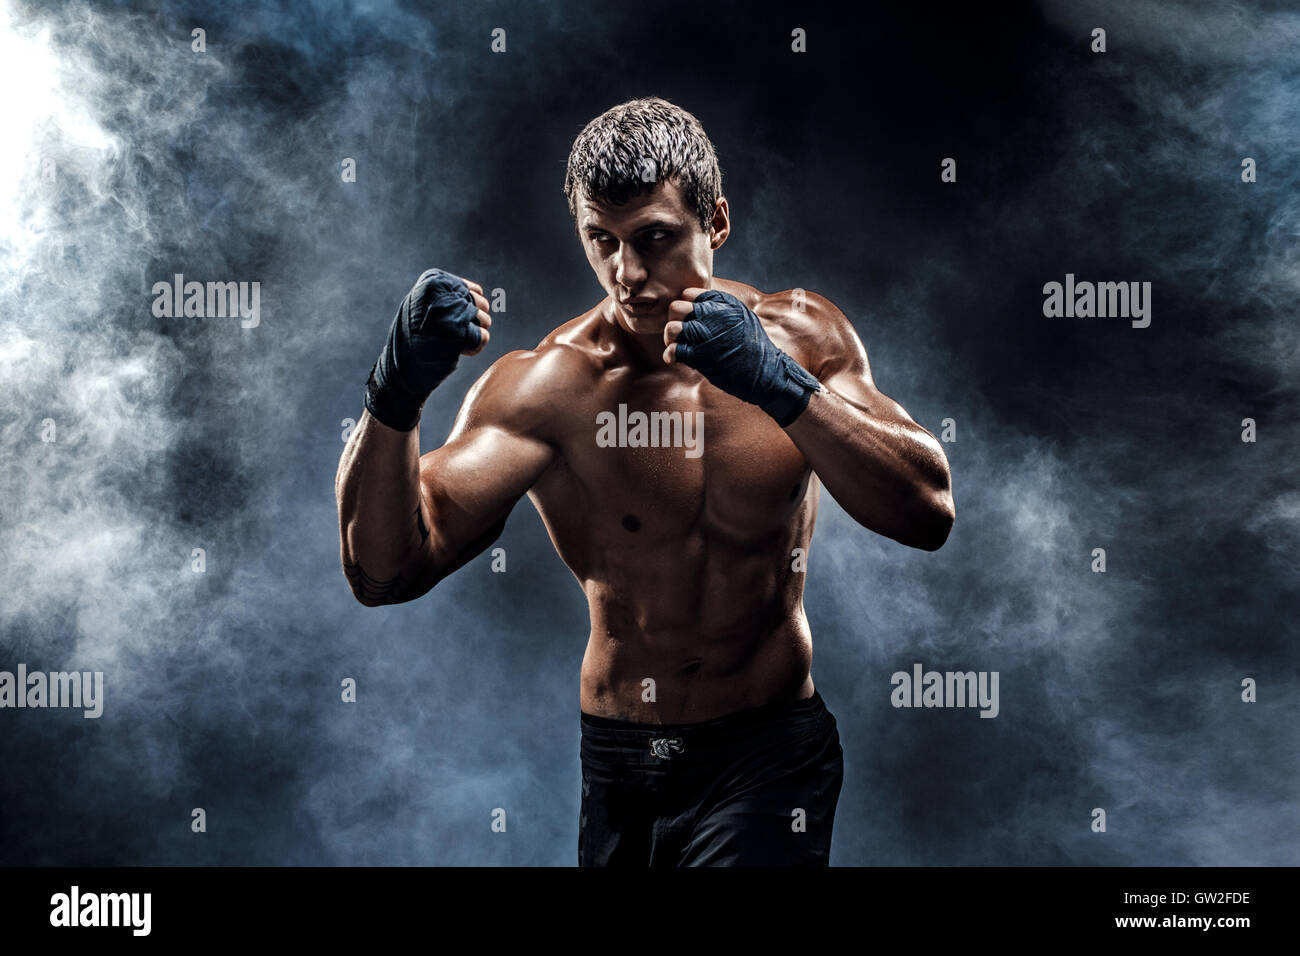 Sportsman Muay Thai Boxer Celebrating Flawless Victory in Boxing Cage.  Isolated on Black Background with Smoke. Copy Stock Image - Image of  people, handsome: 91121441